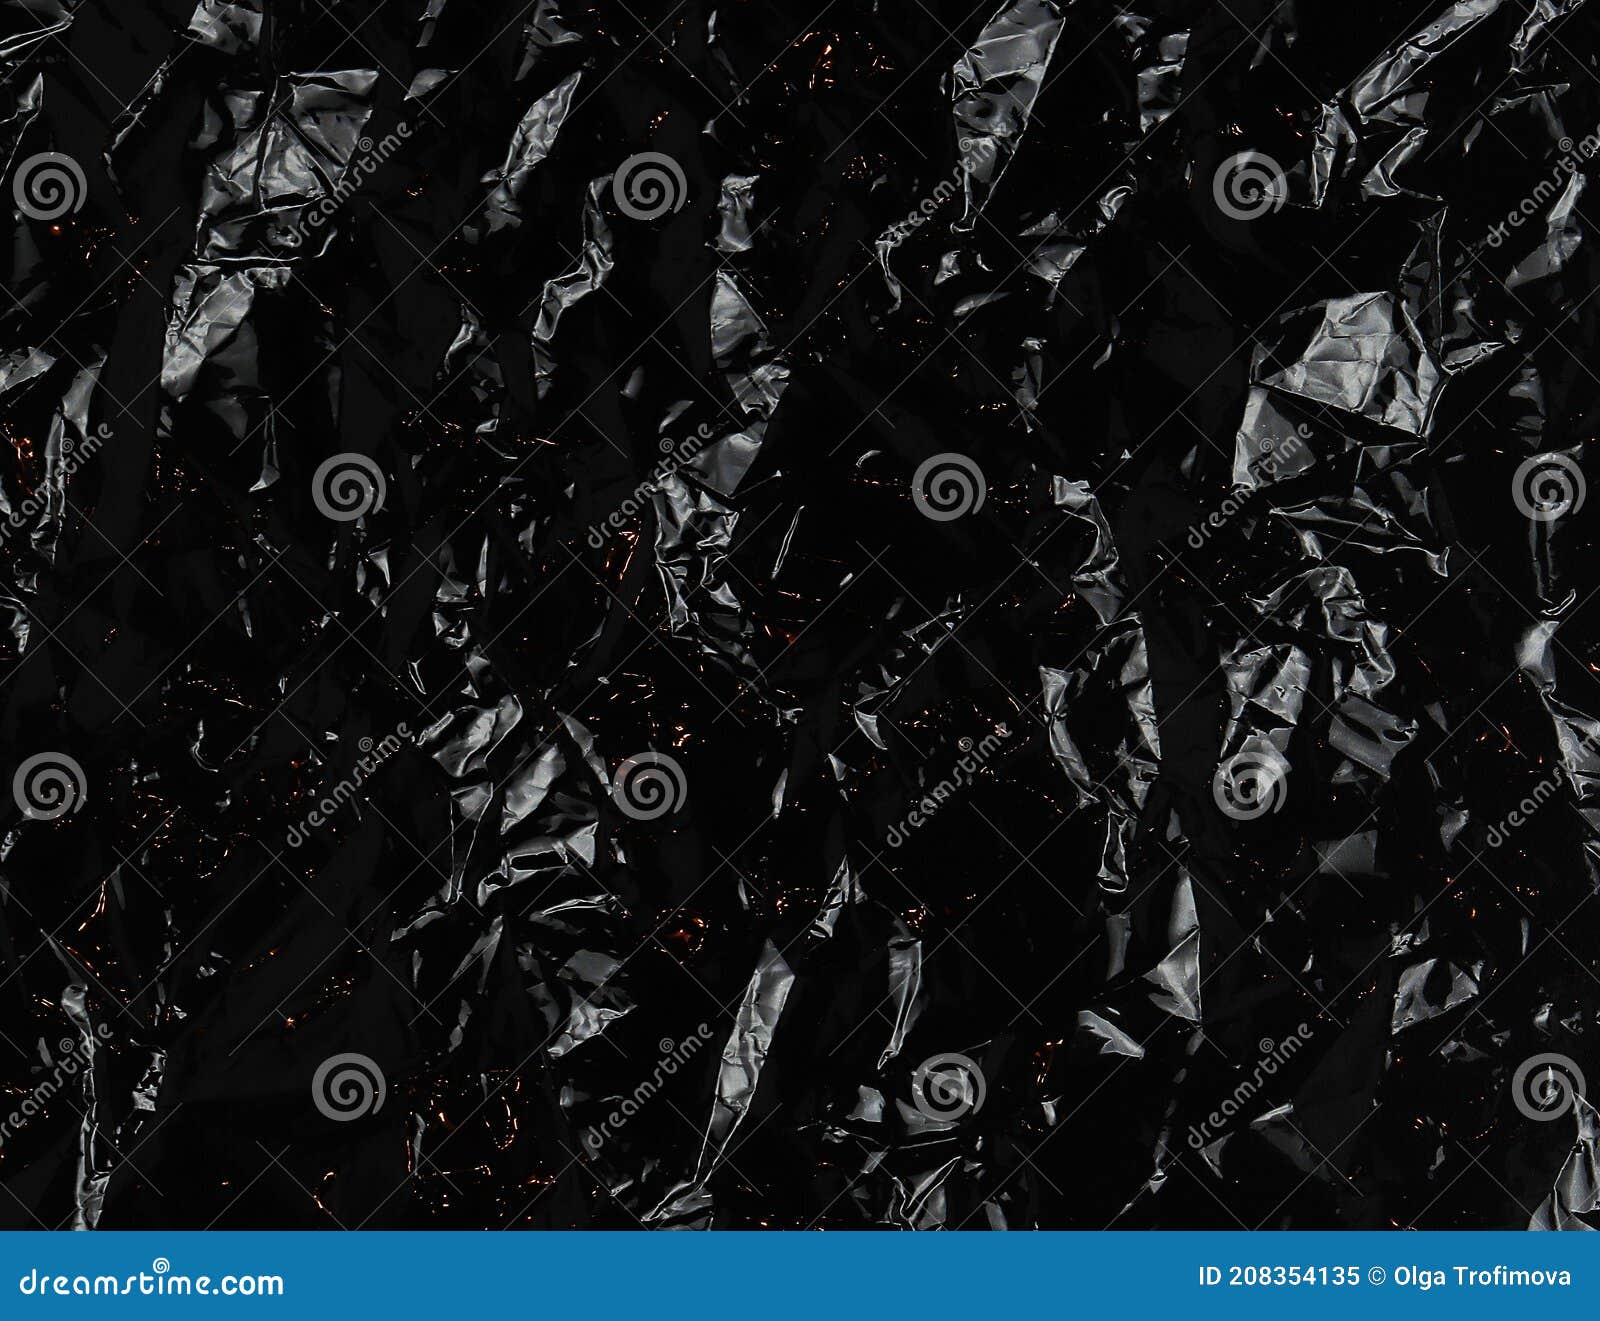 Black Background Made of Crumpled Polyethylene. Abstract Black Texture ...